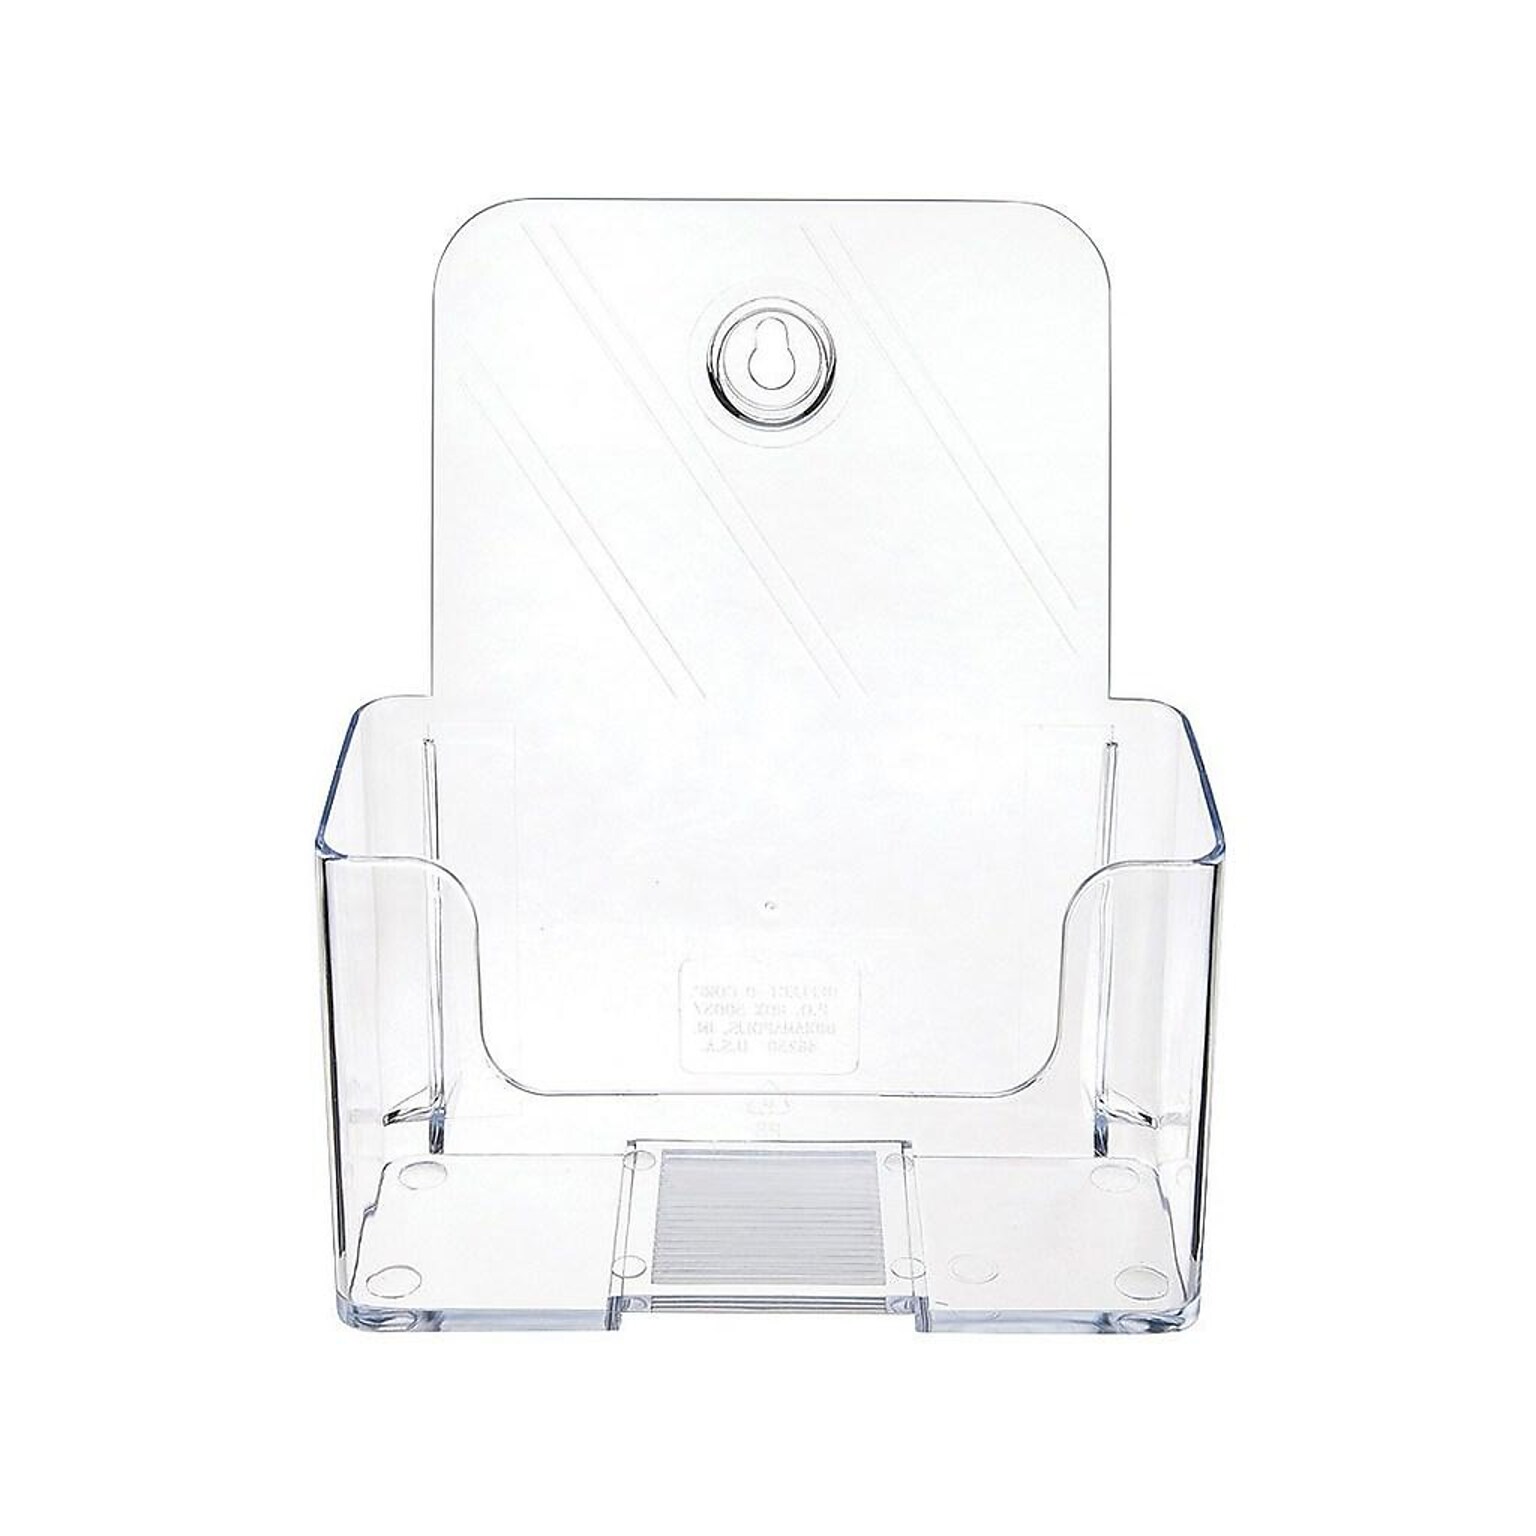 Deflecto® Docuholder® Booklet Size Literature Holder 7.75 x 6.5 x 3.75, Crystal Clear Plastic (74901)